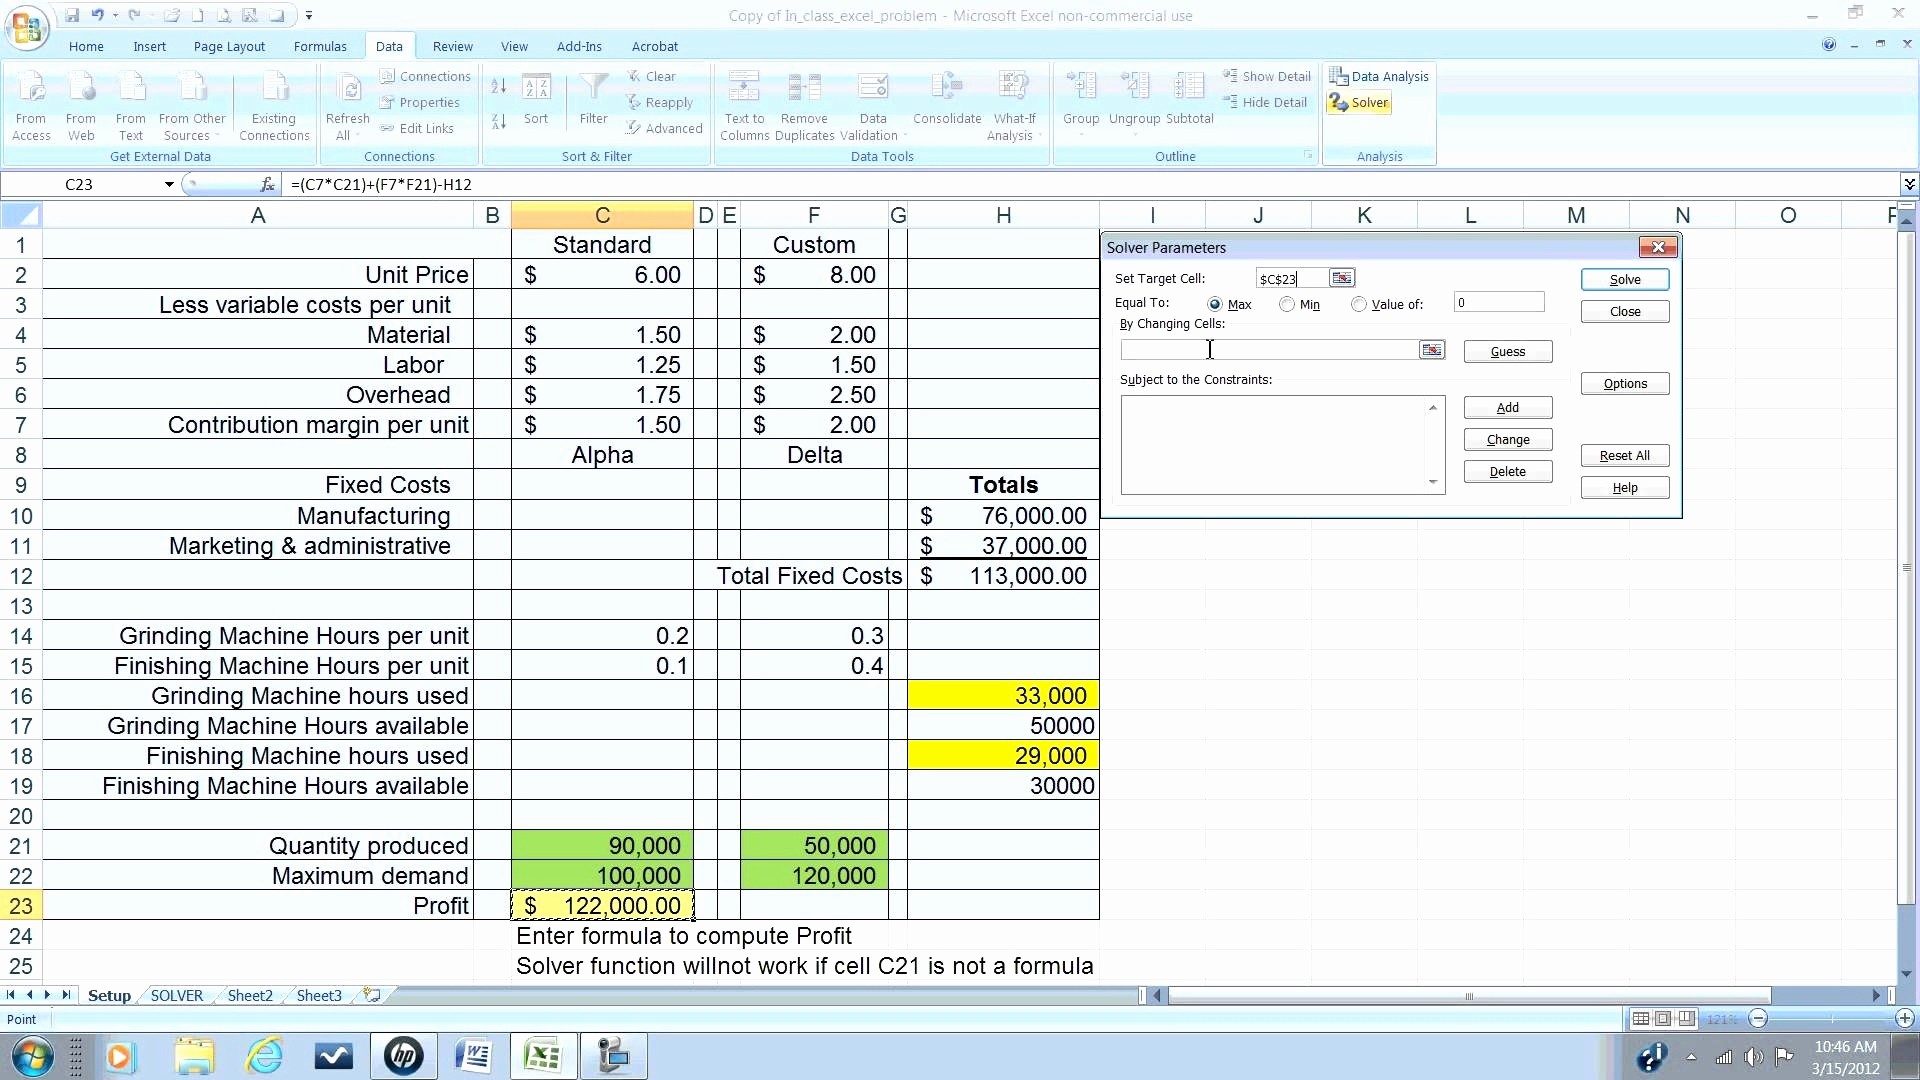 50 Best Of Capacity Planning Template In Excel Spreadsheet Document Manufacturing